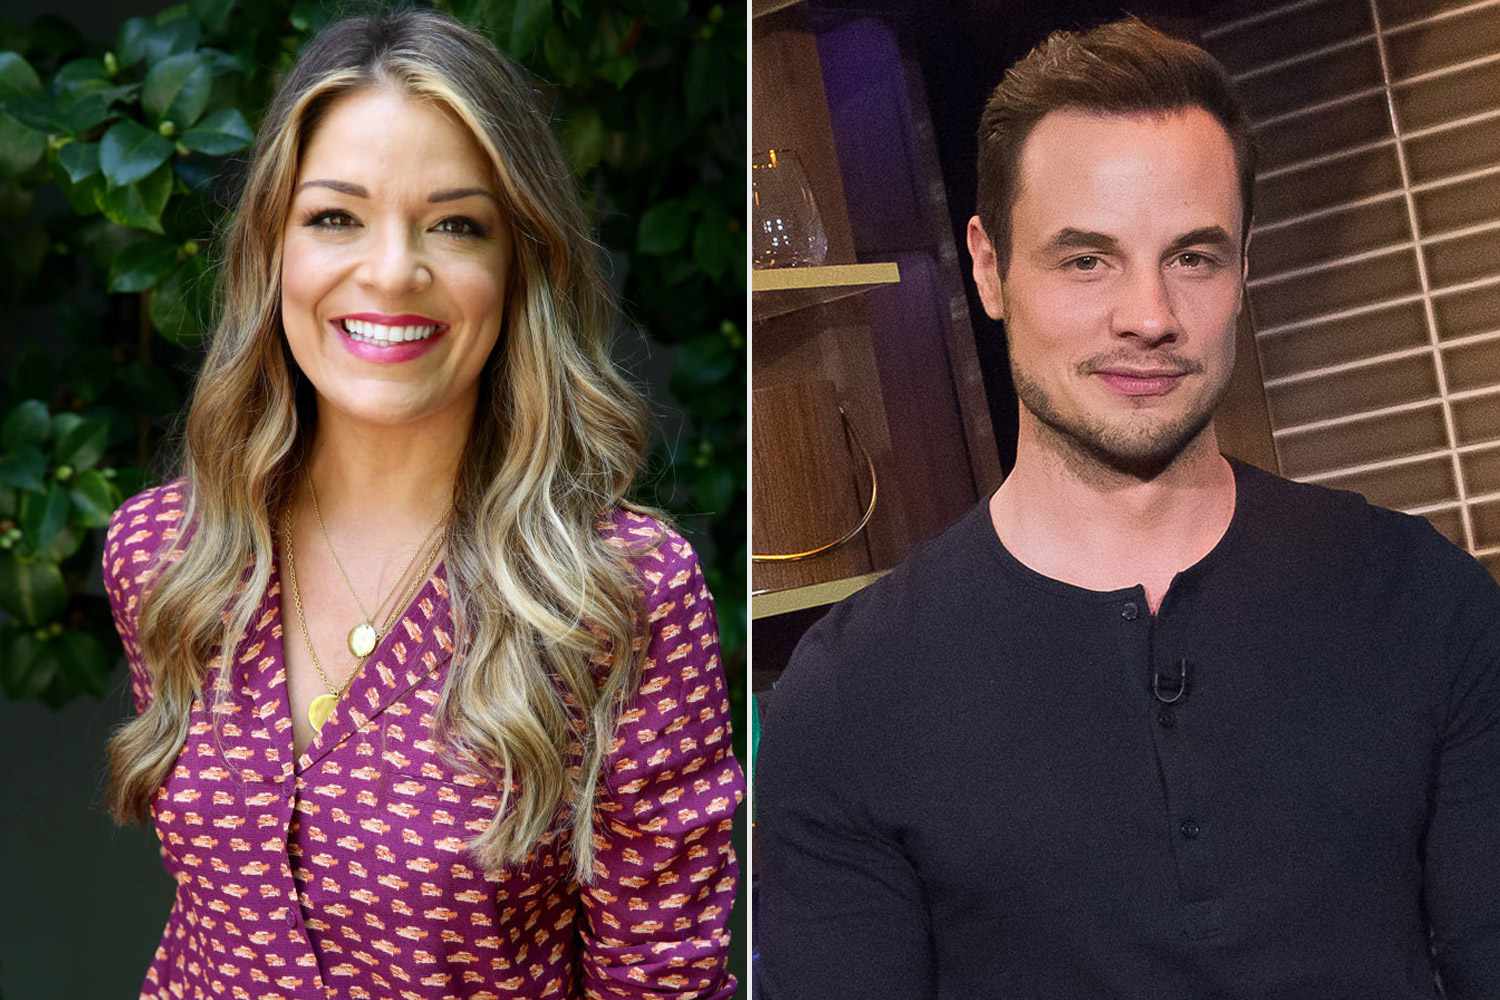 HGTV star Sabrina Soto has been called off, Her Engagement to Chef Dean Sheremet.